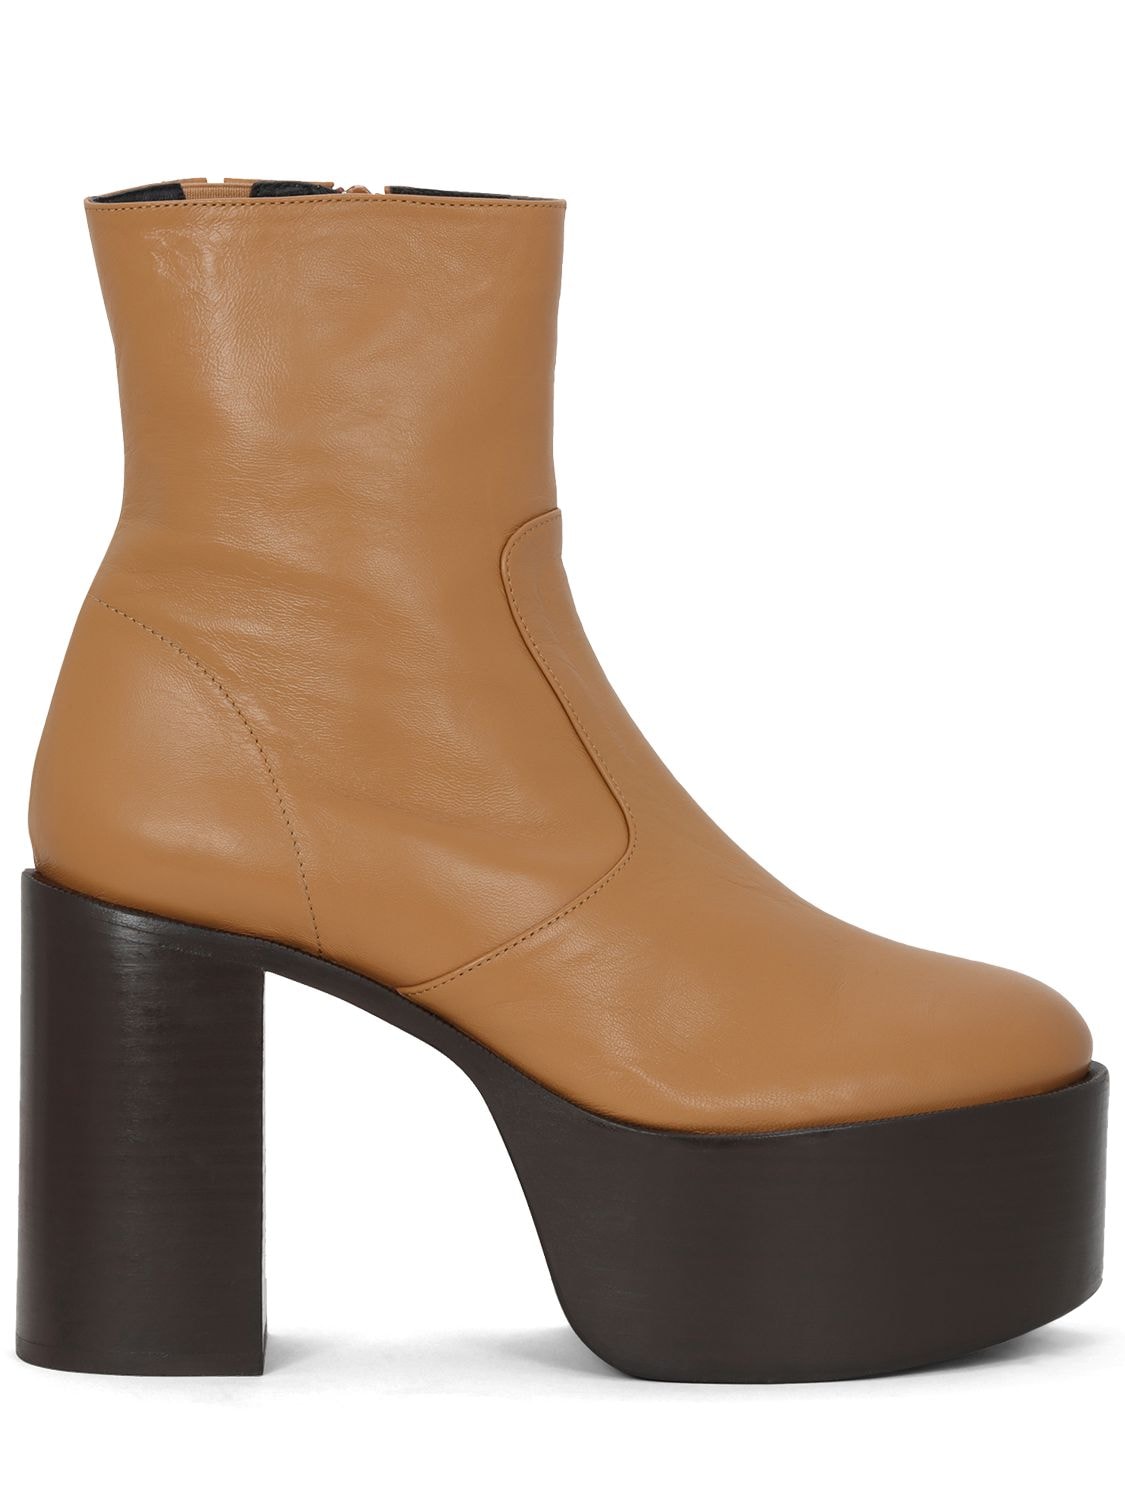 SIMON MILLER 90MM LOW RAID LEATHER ANKLE BOOTS